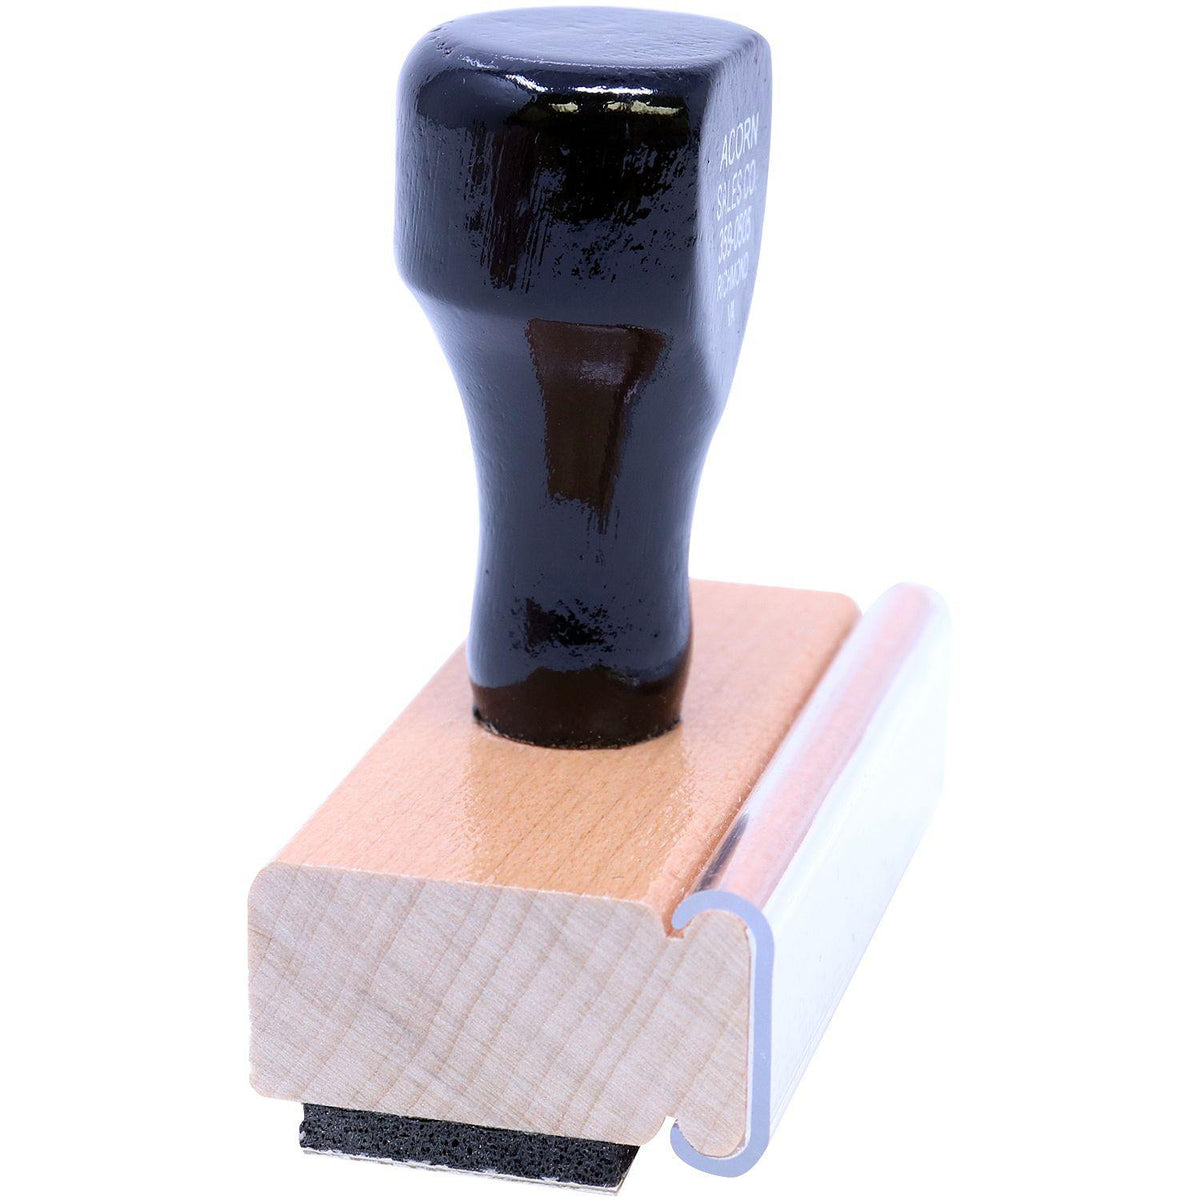 Medical Kaiser Rubber Stamp - Engineer Seal Stamps - Brand_Acorn, Impression Size_Small, Stamp Type_Regular Stamp, Type of Use_Medical Office